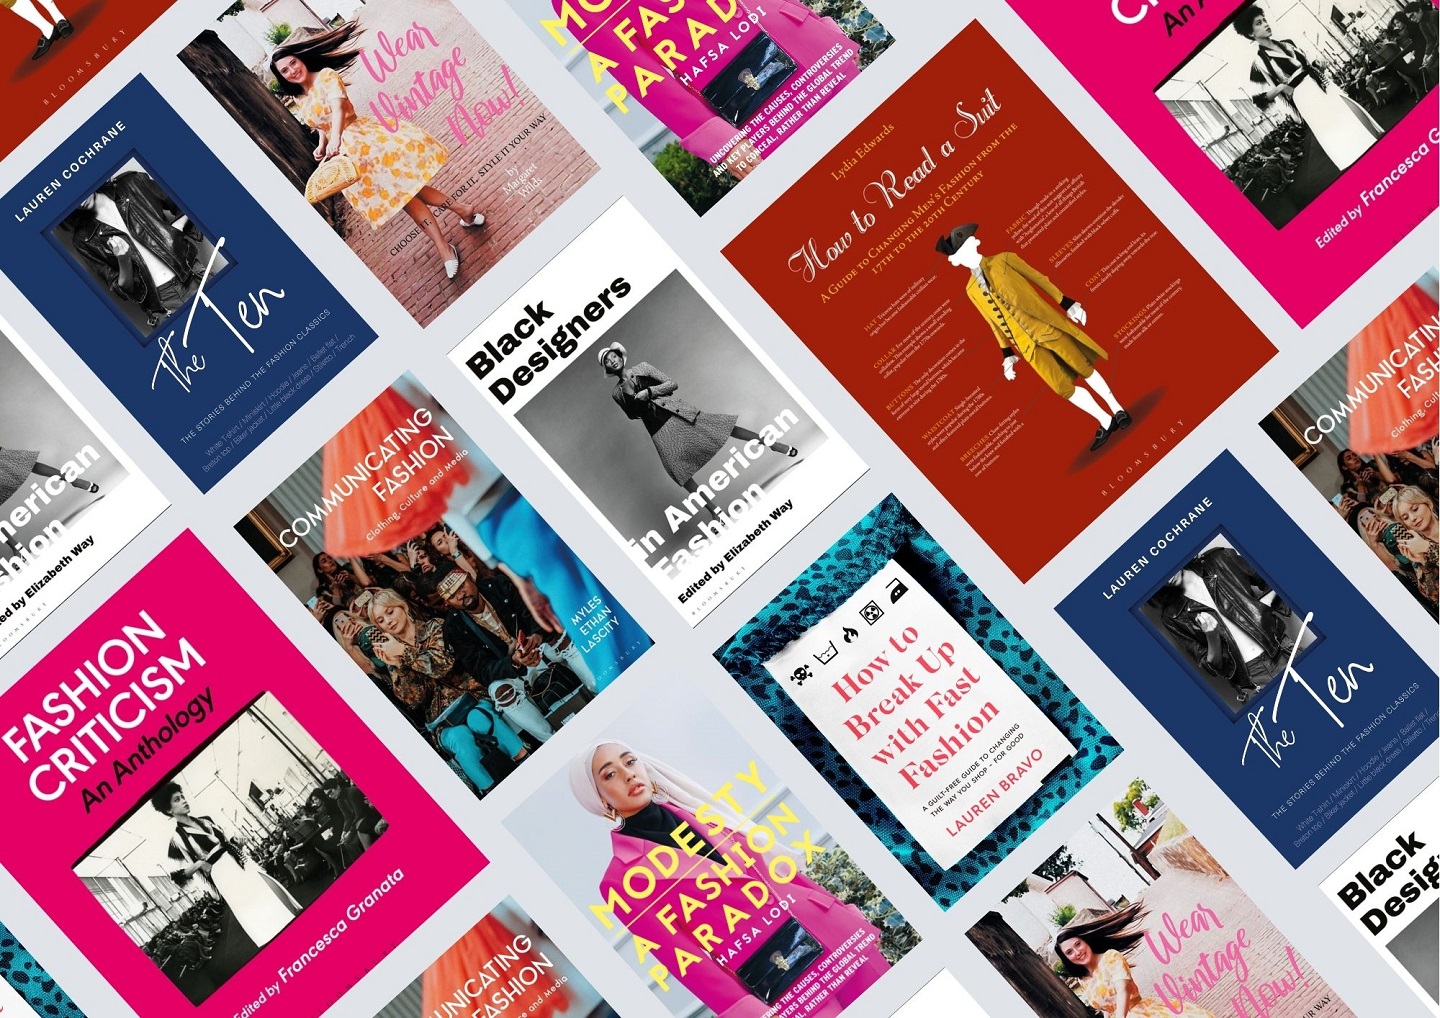 8 fashion books every style enthusiast should read right now Options